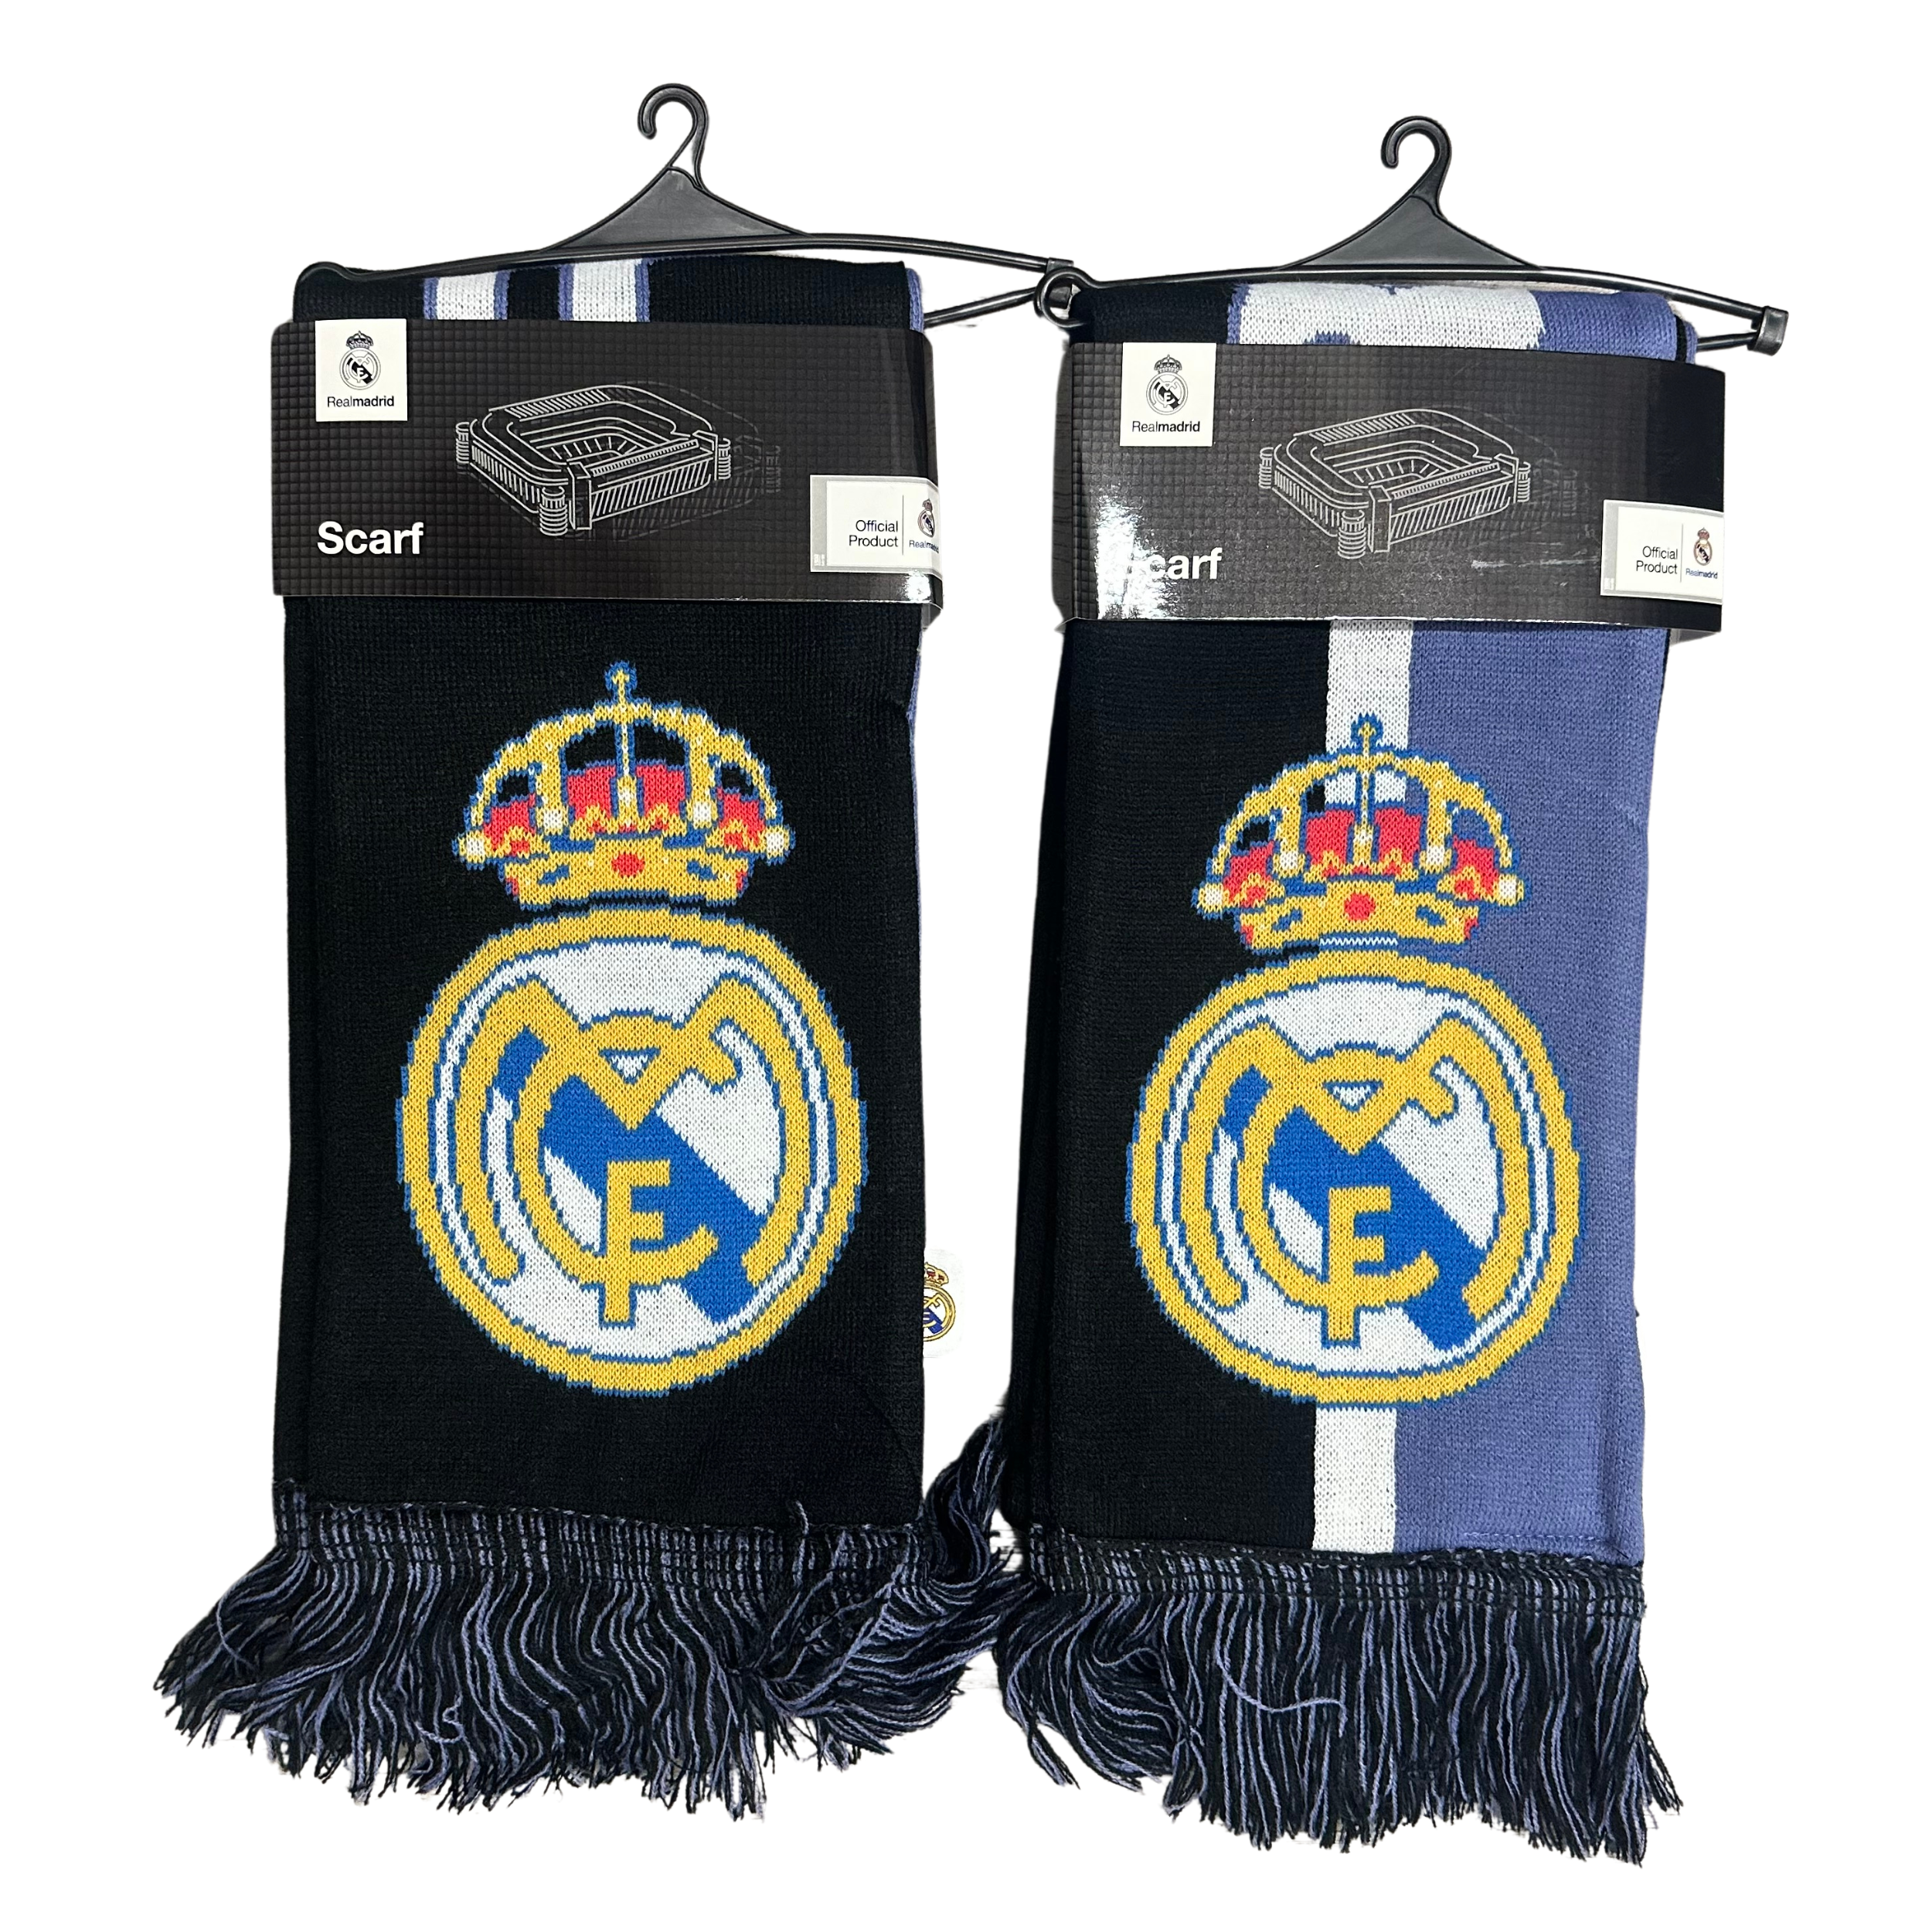 Scarf  Real Madrid Officially Licensed Product Soccer Scarf  Reversible Scarf